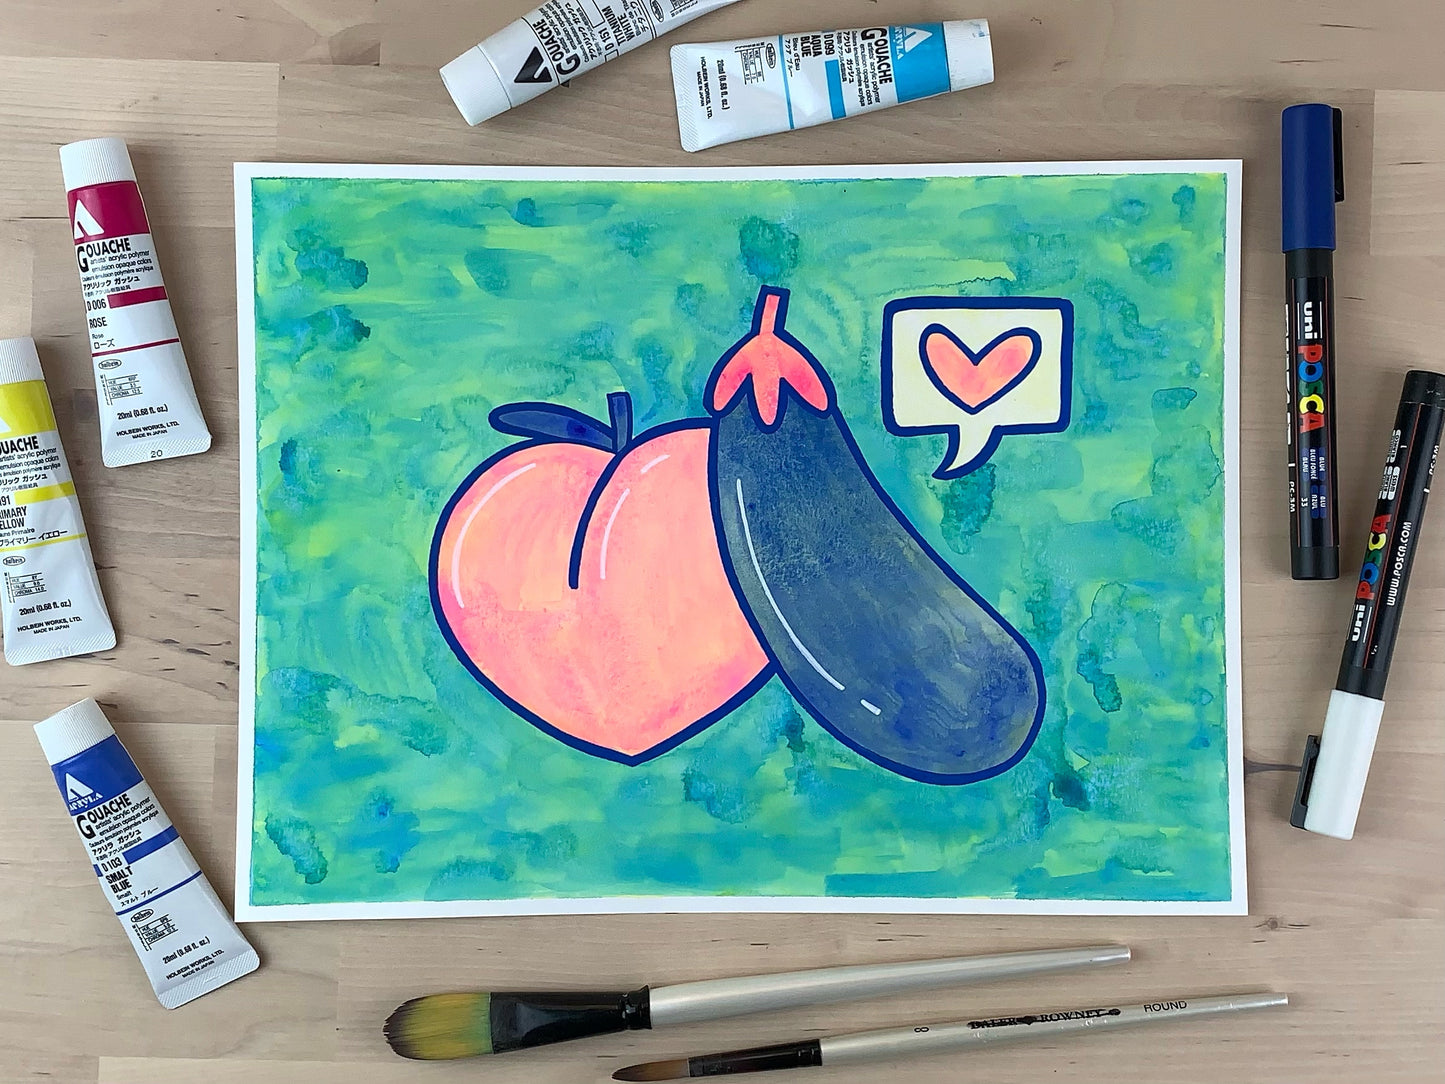 Painting of a peach and eggplant emoji with a like icon.